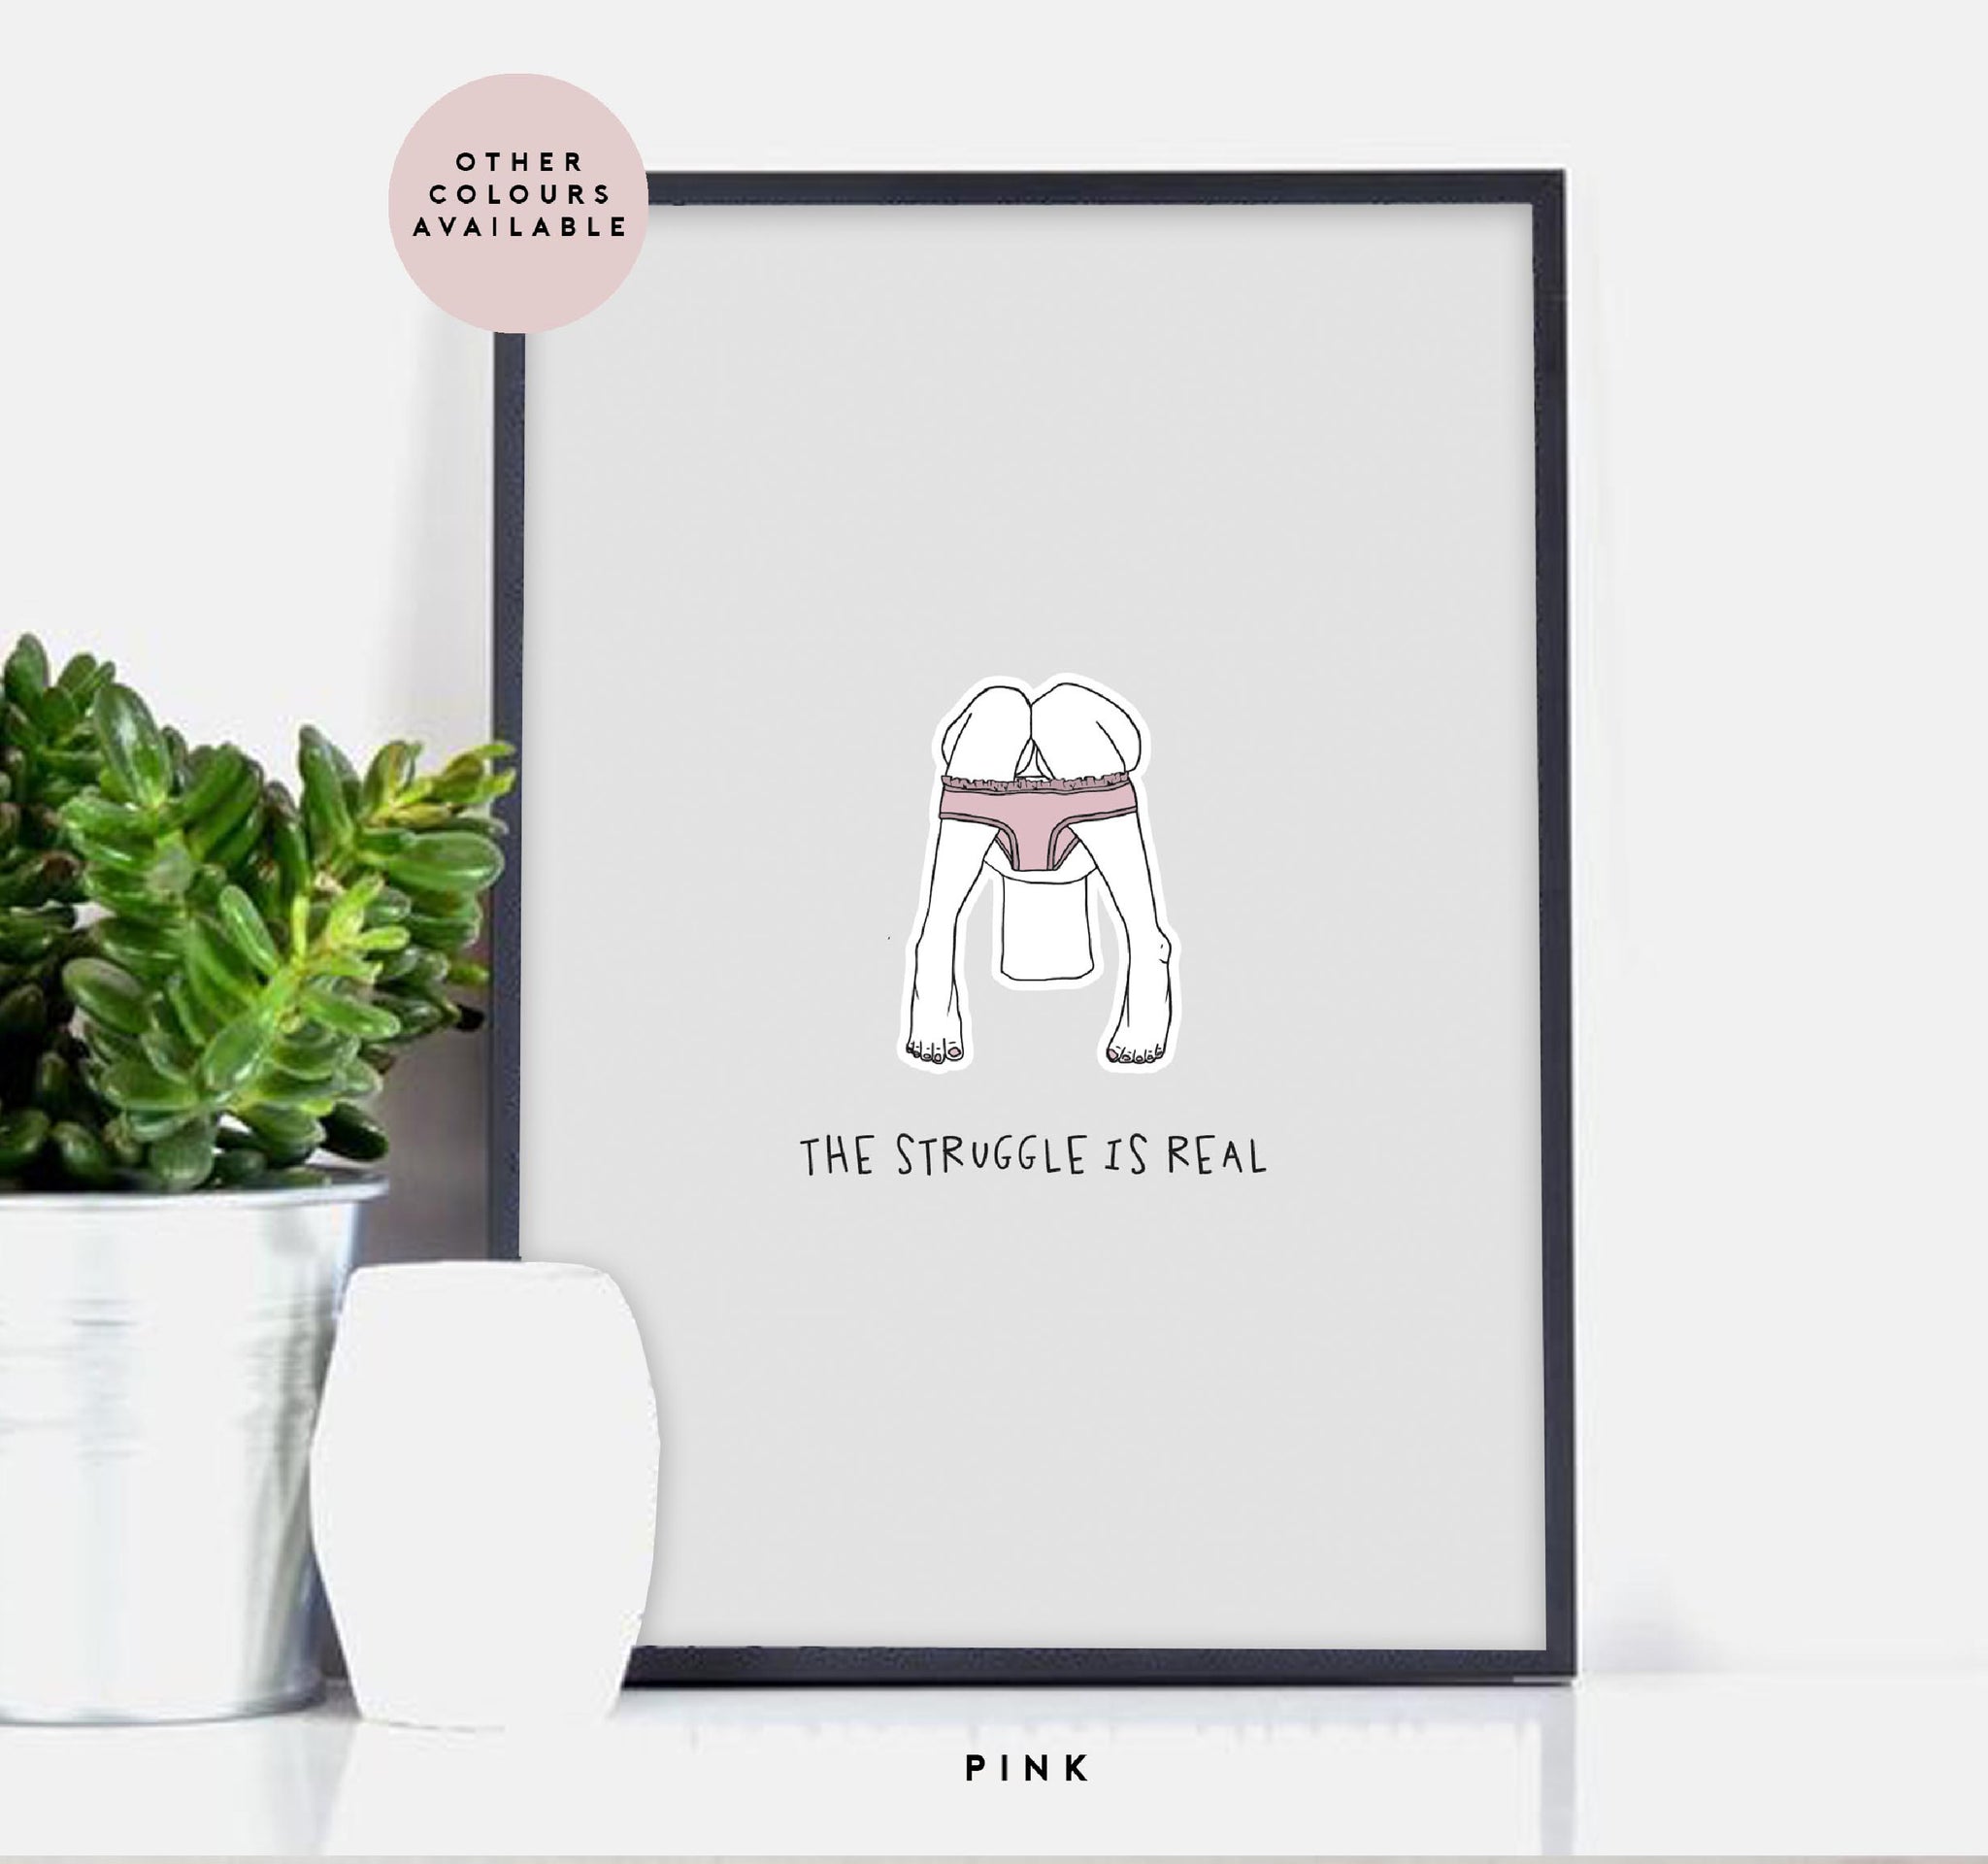 'The Struggle Is Real' female illustration bathroom print. Funny and humorous bathroom wall art of man sitting on the toilet reading a newspaper.